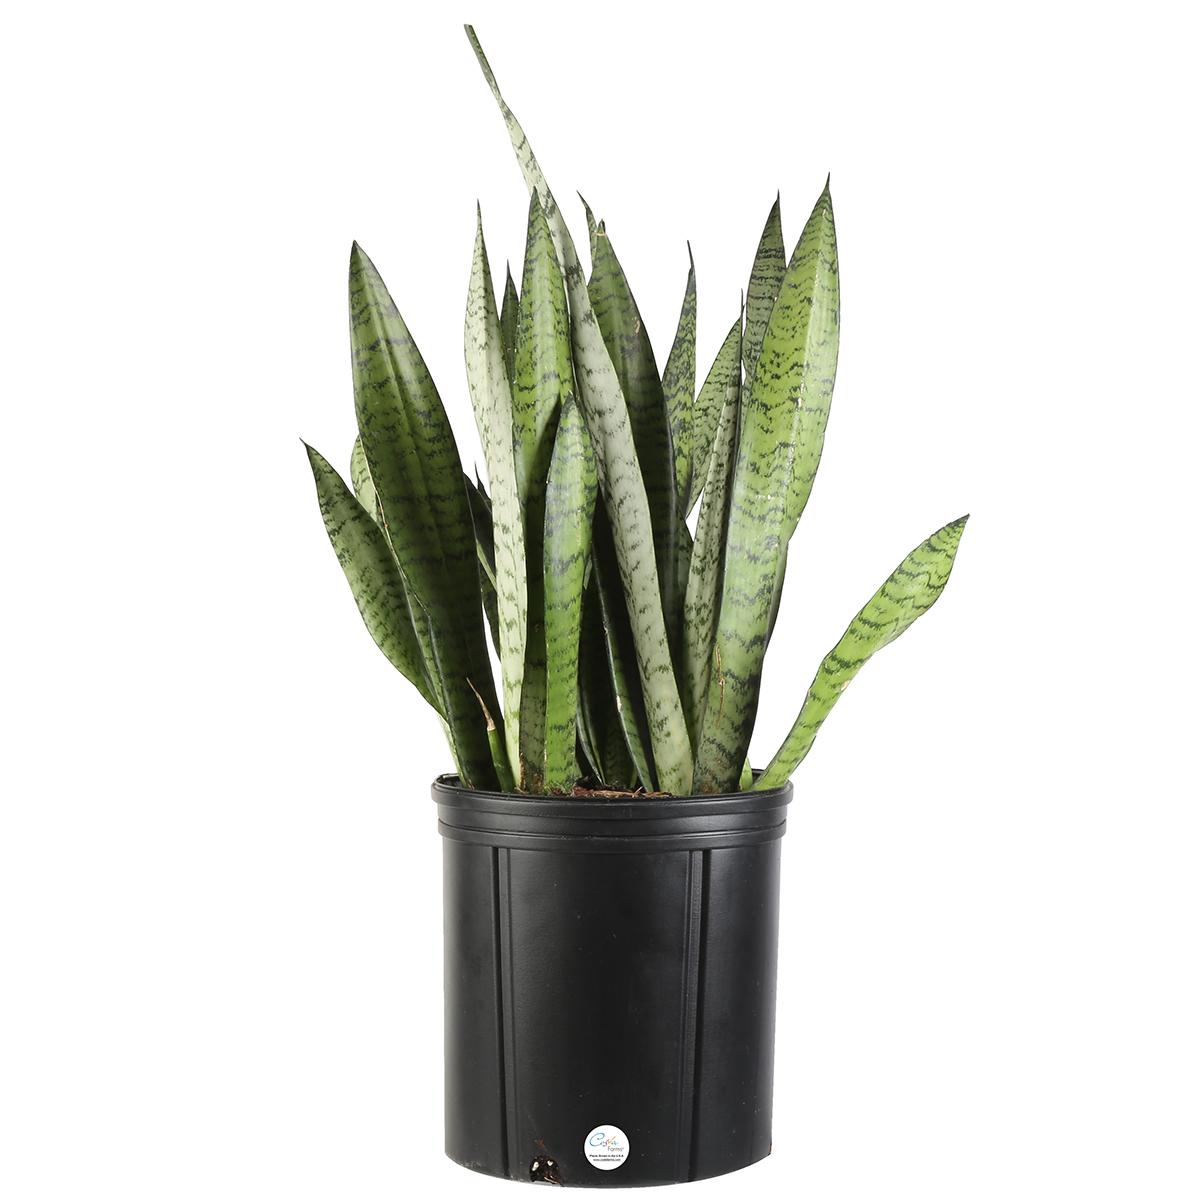 Costa Farms 2ft Snake Plant in Grower Pot for $16.96